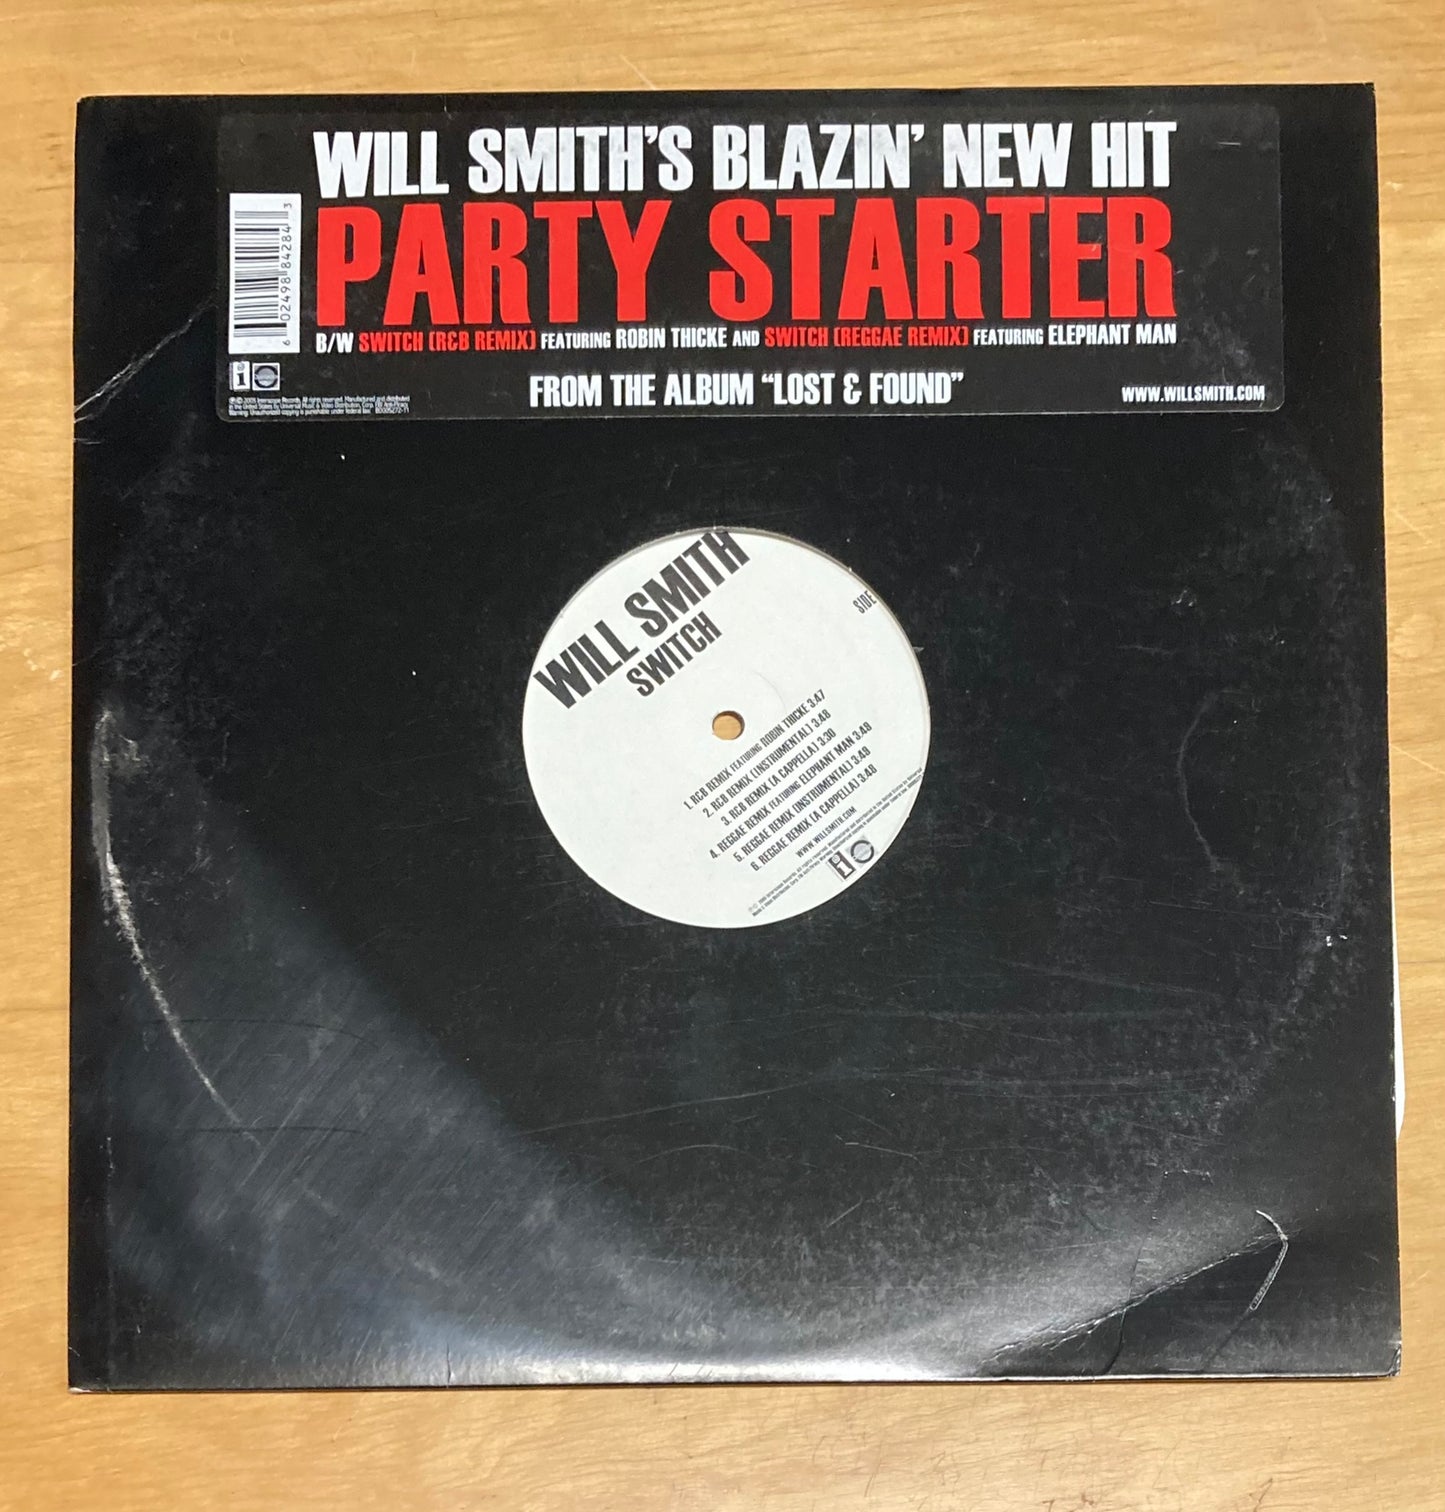 Party Starter/Switch - Will Smith